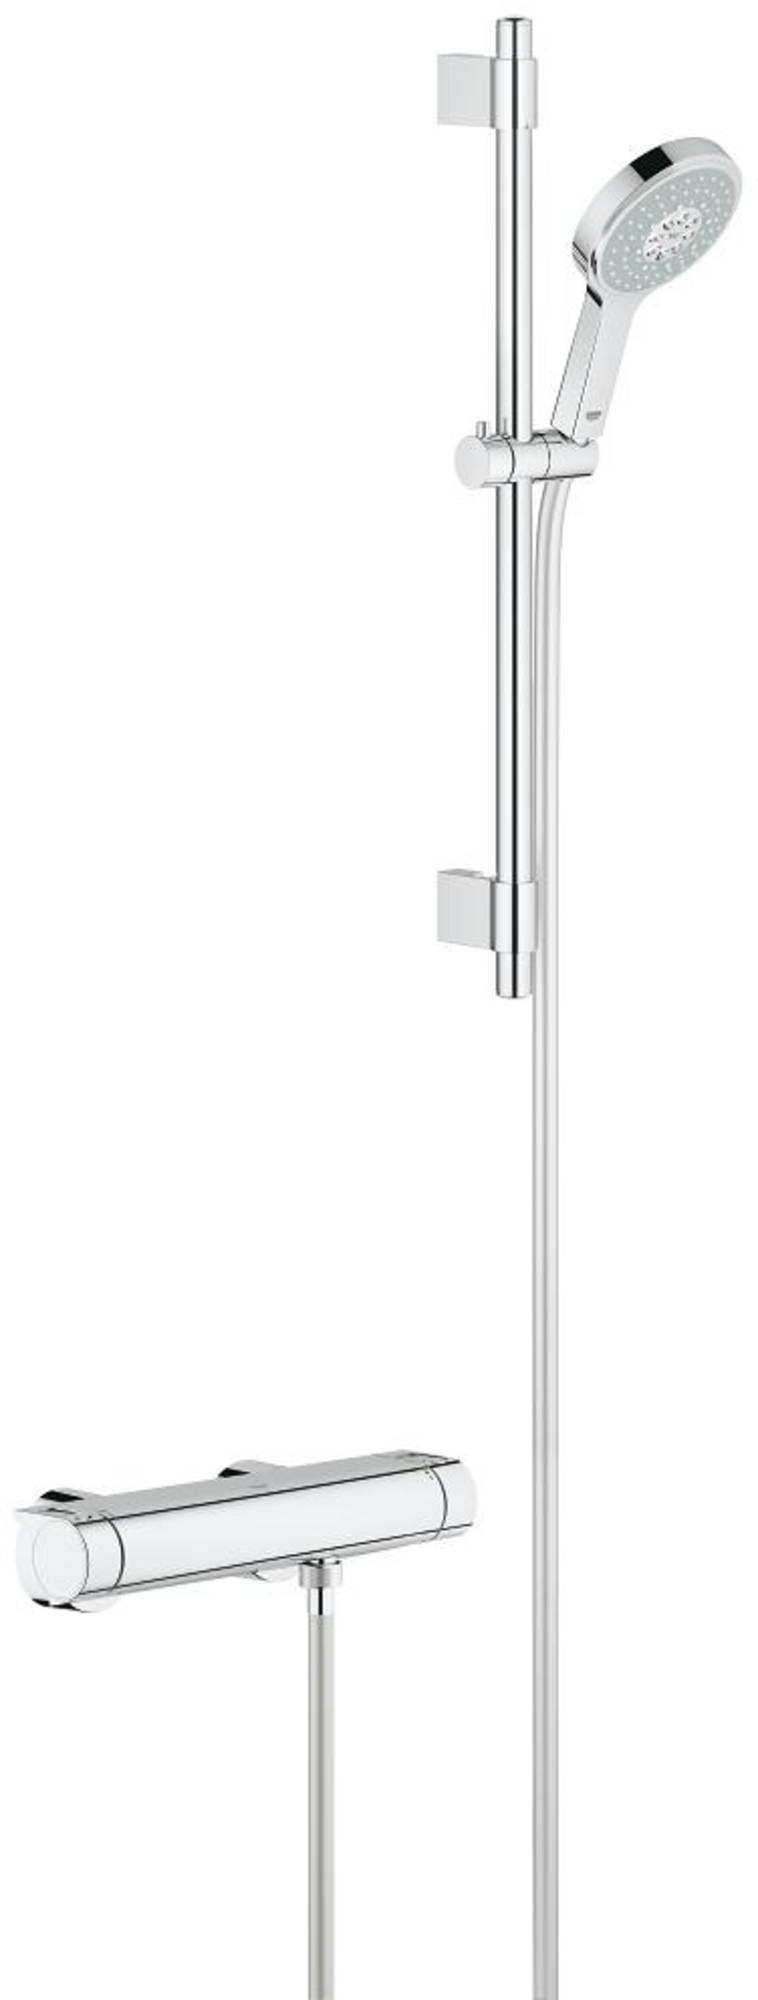 Grohe Grohtherm 2000 New douchethermostaat met perfect showerset Power & Chroom -